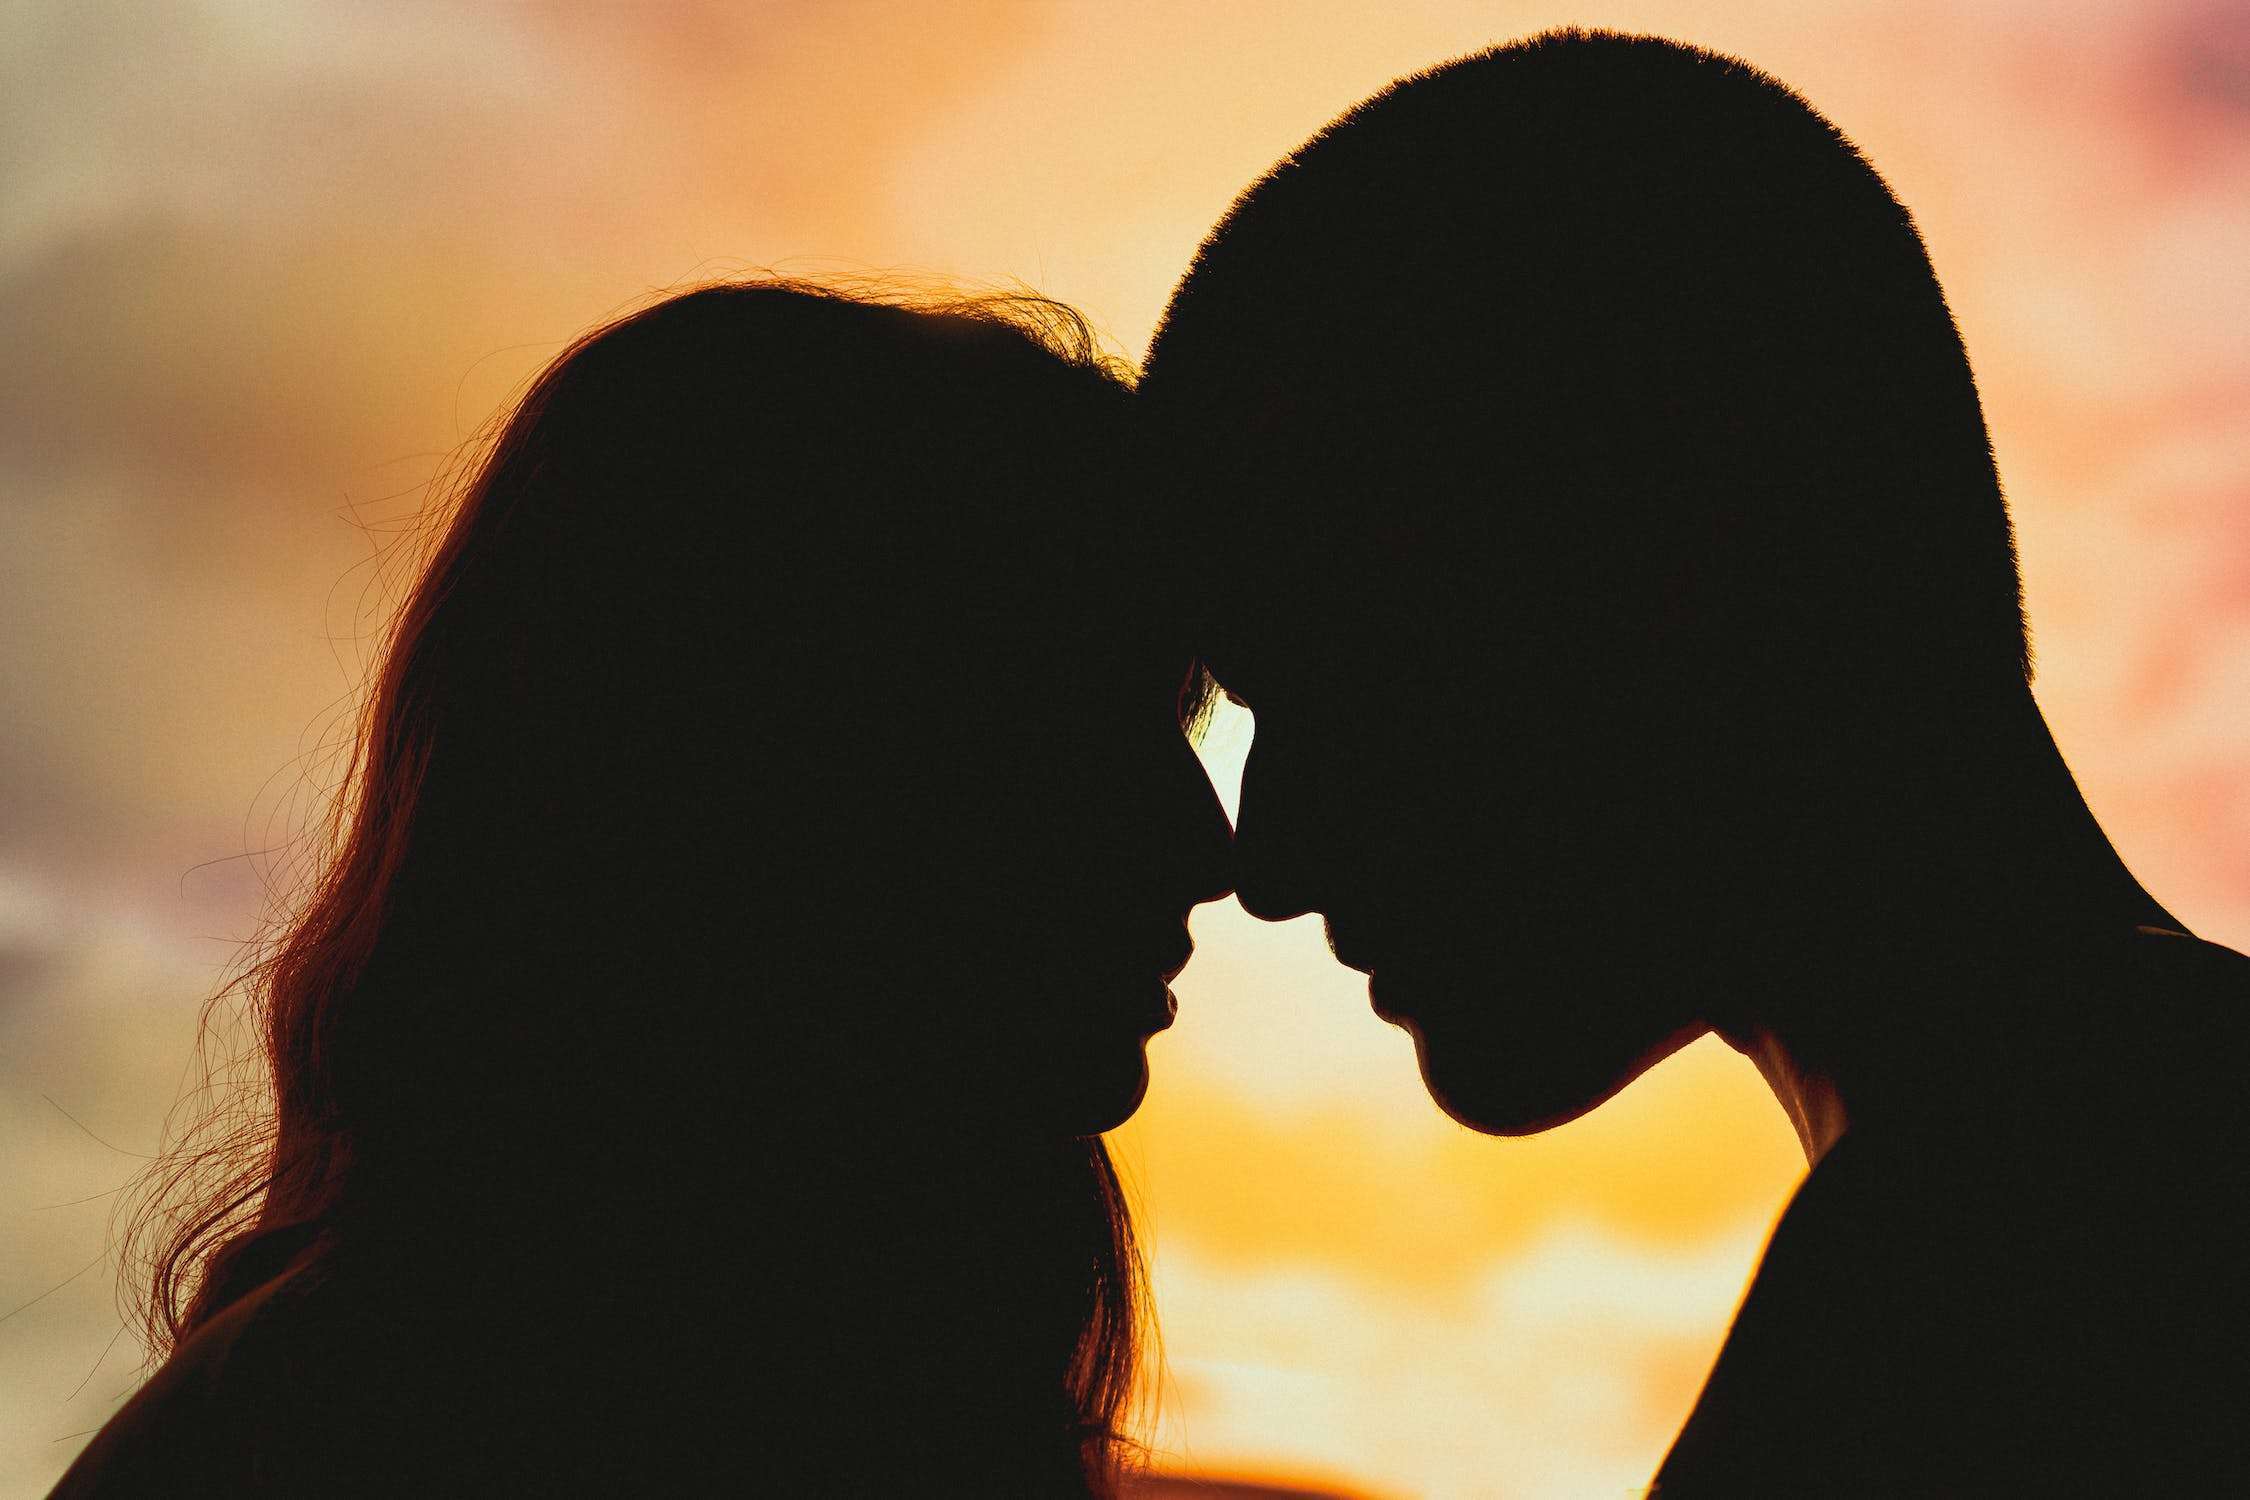 How Do Guys Know When They've Met The One? Emotional connection: Men often feel a strong emotional connection with someone they see as a potential partner.